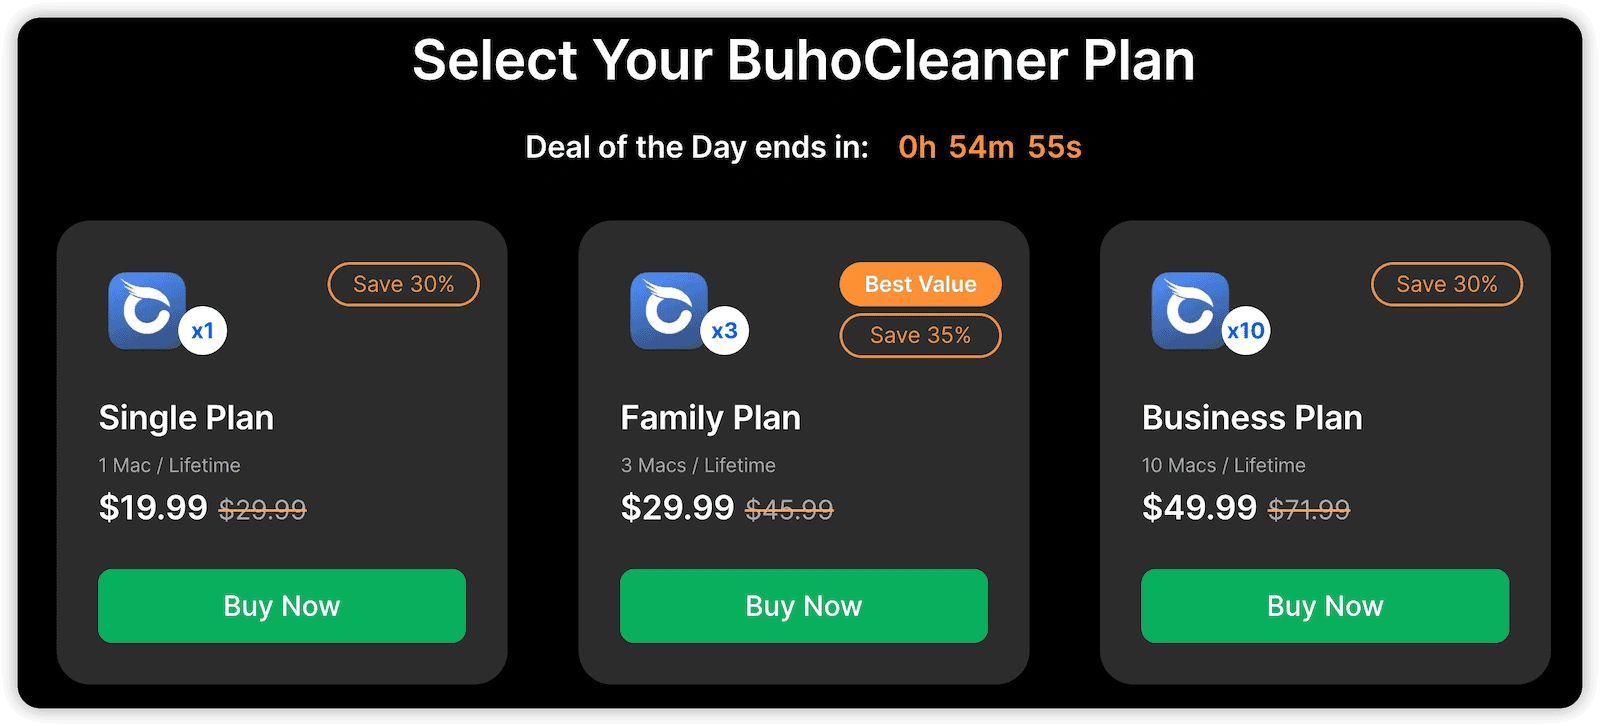 select-your-buhocleaner-plan.png